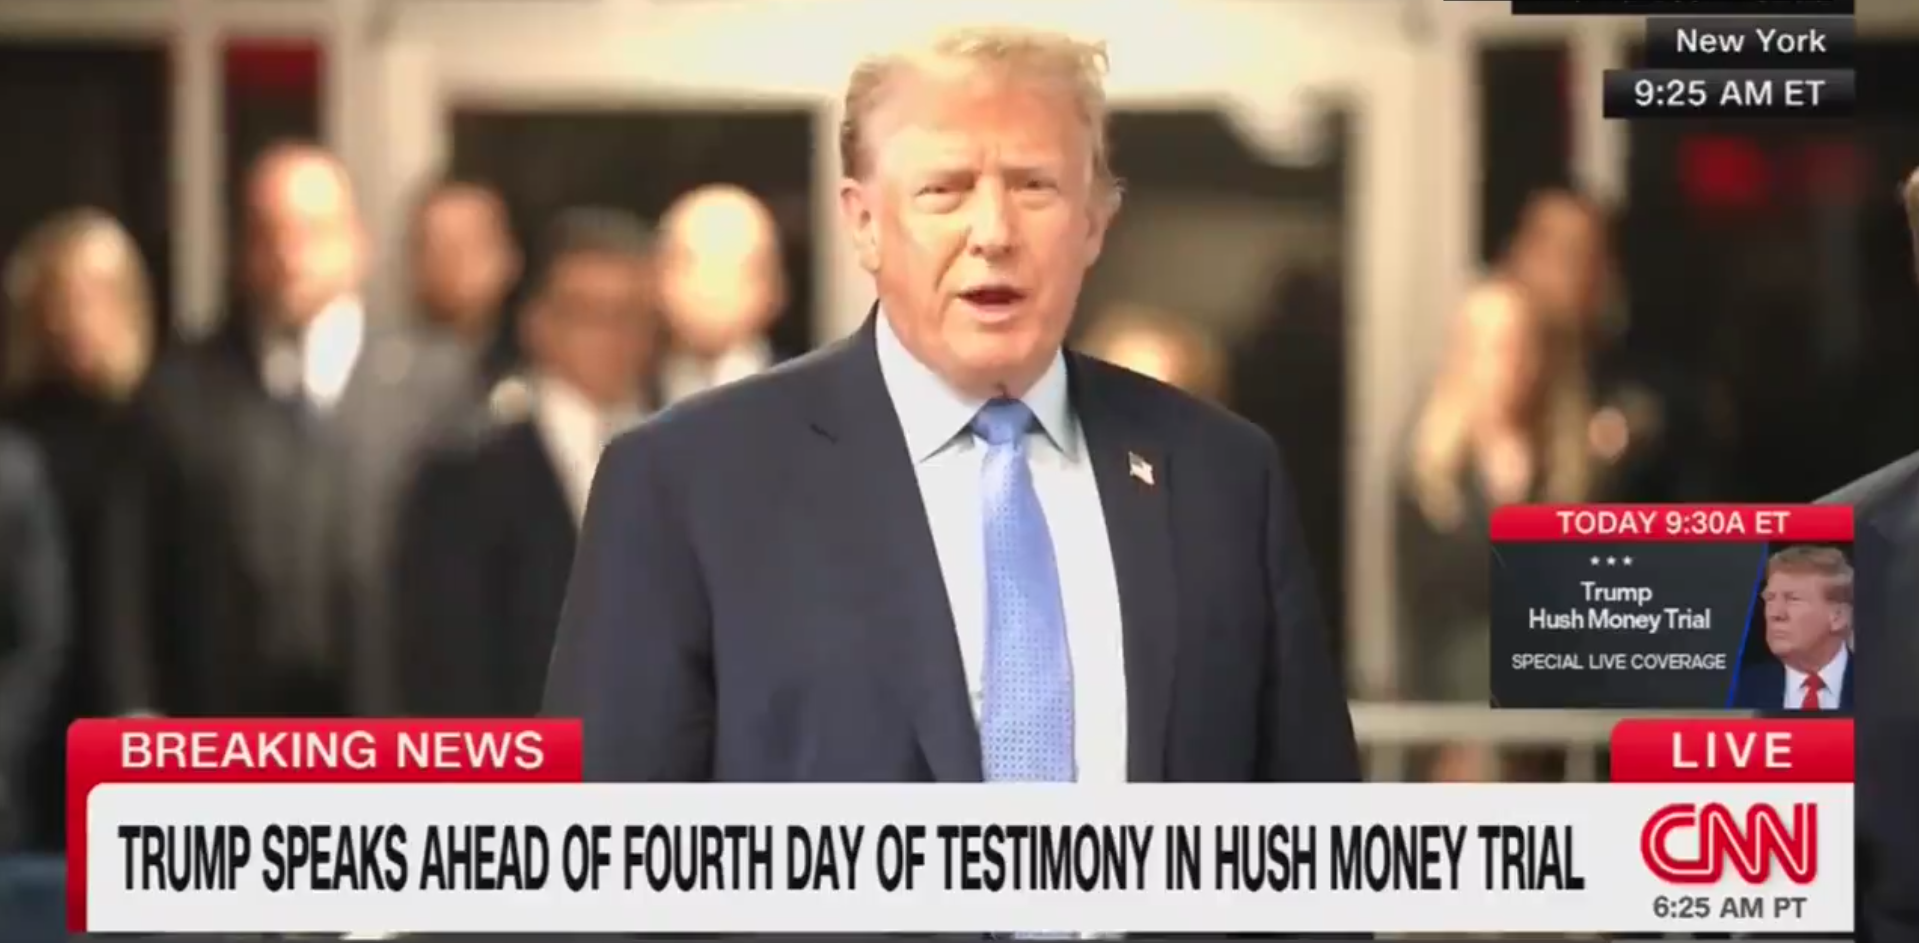 Trump Complains About the ‘Freezing’ Courtroom — Suggests It Is ‘On Purpose’